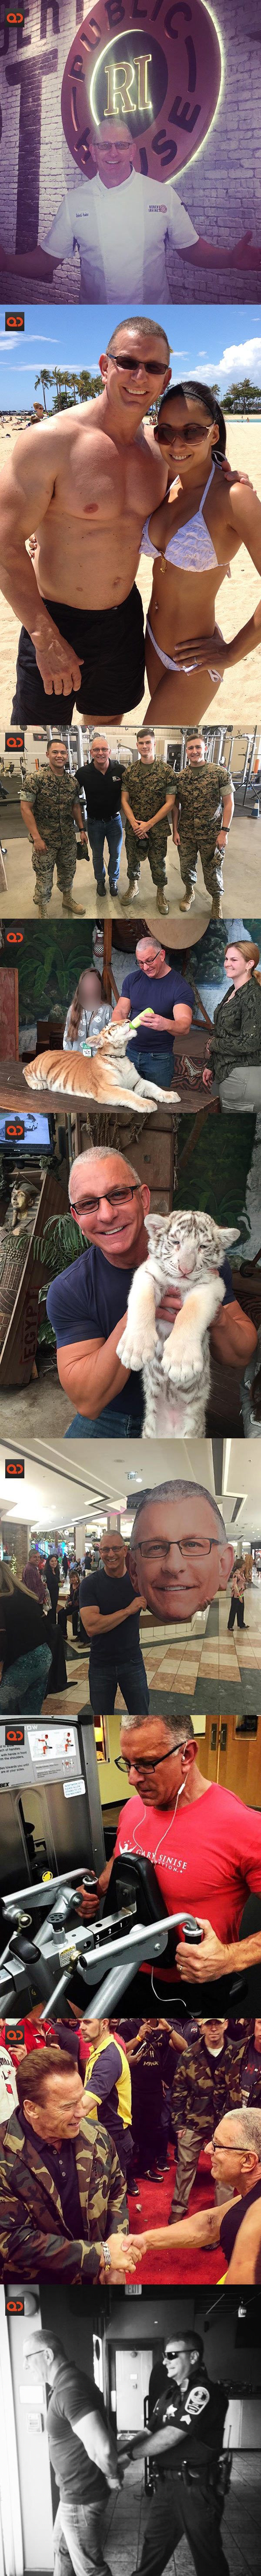 Robert Irvine, British Celebrity Chef From Food Network Dinner Impossible, Naked Selfies And Alleged Dick Pics Leak!